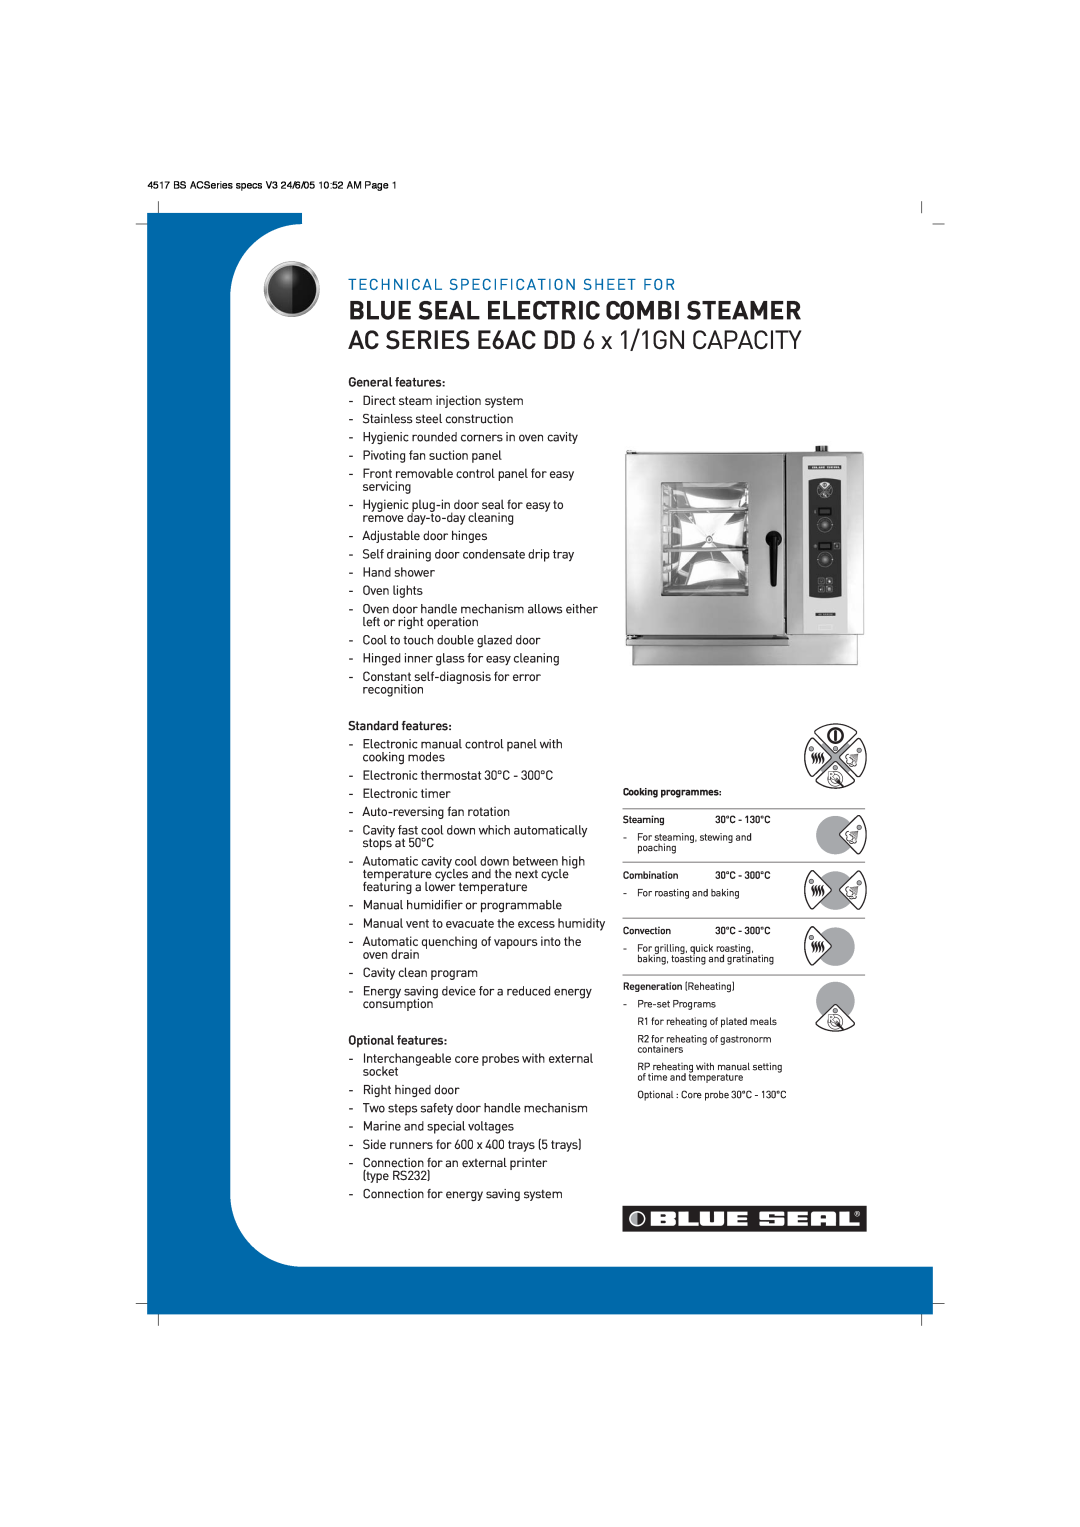 Moffat technical specifications Blue Seal Electric Combi Steamer, AC SERIES E6AC DD 6 x 1/1GN CAPACITY 